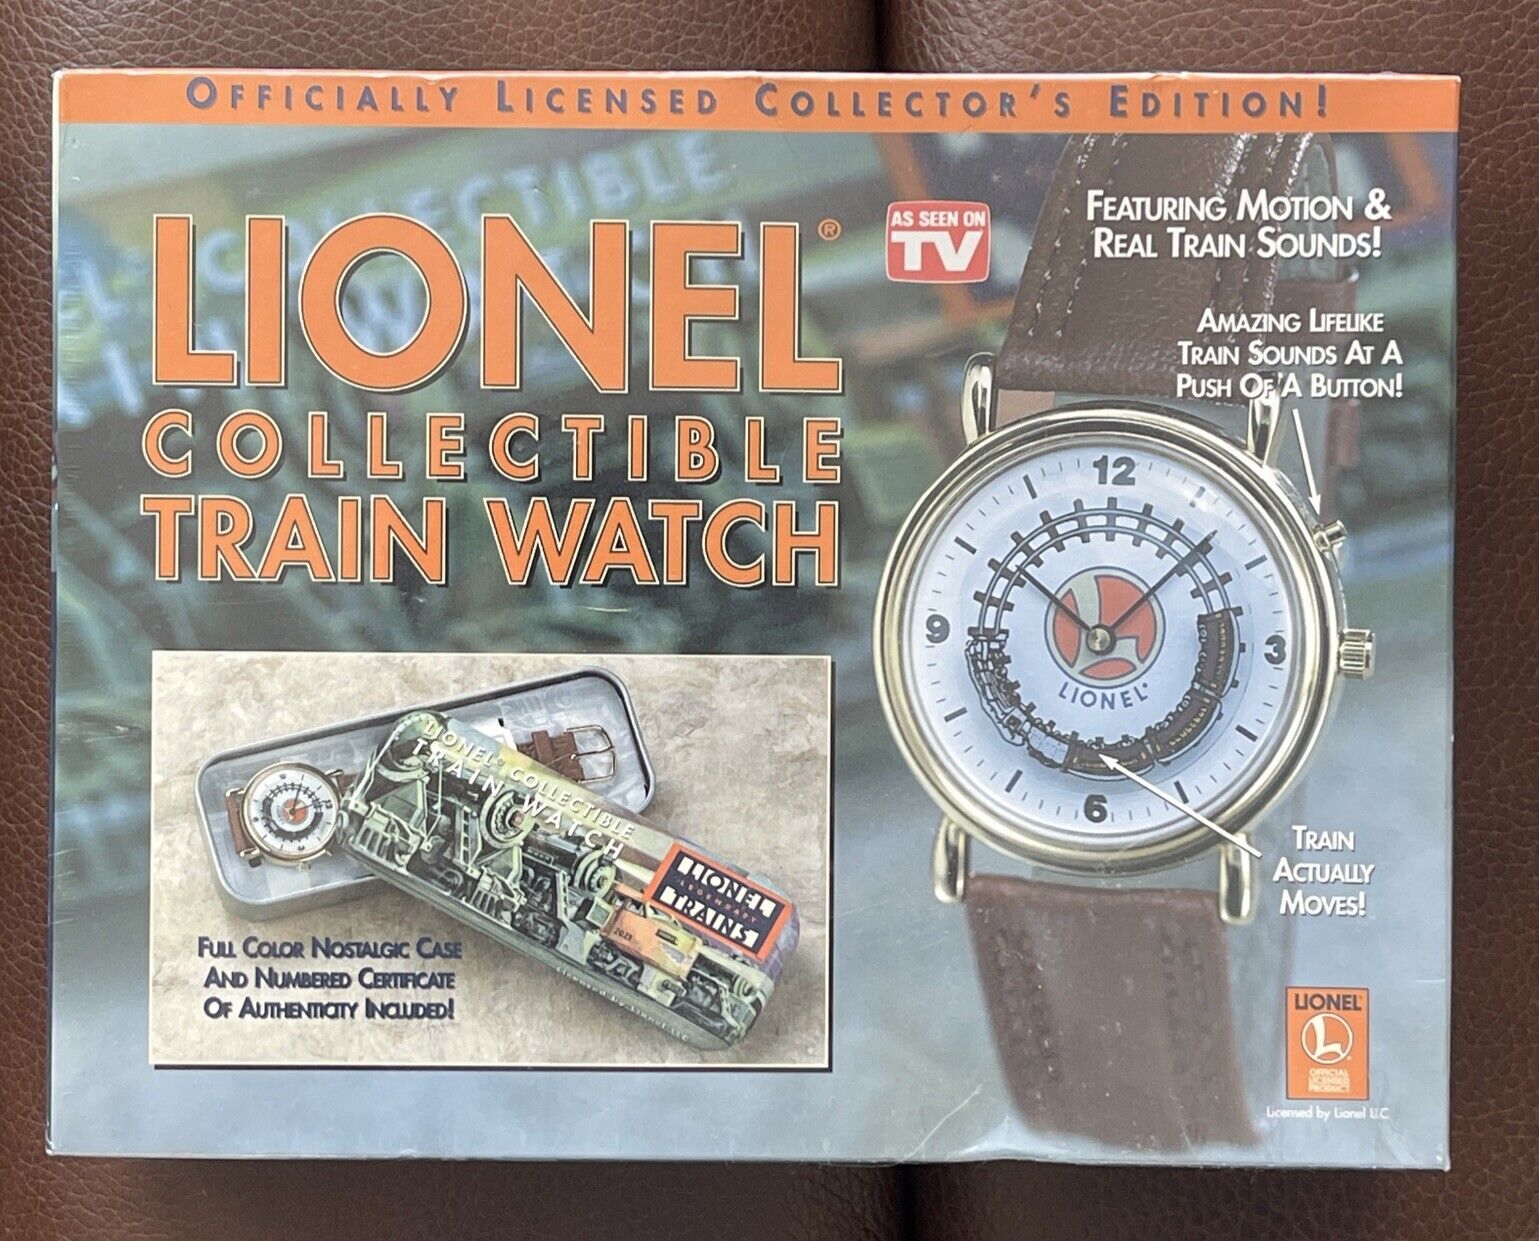 Lionel Collectible Train Watch Leather Wristband watch Origl sealed unopened Box